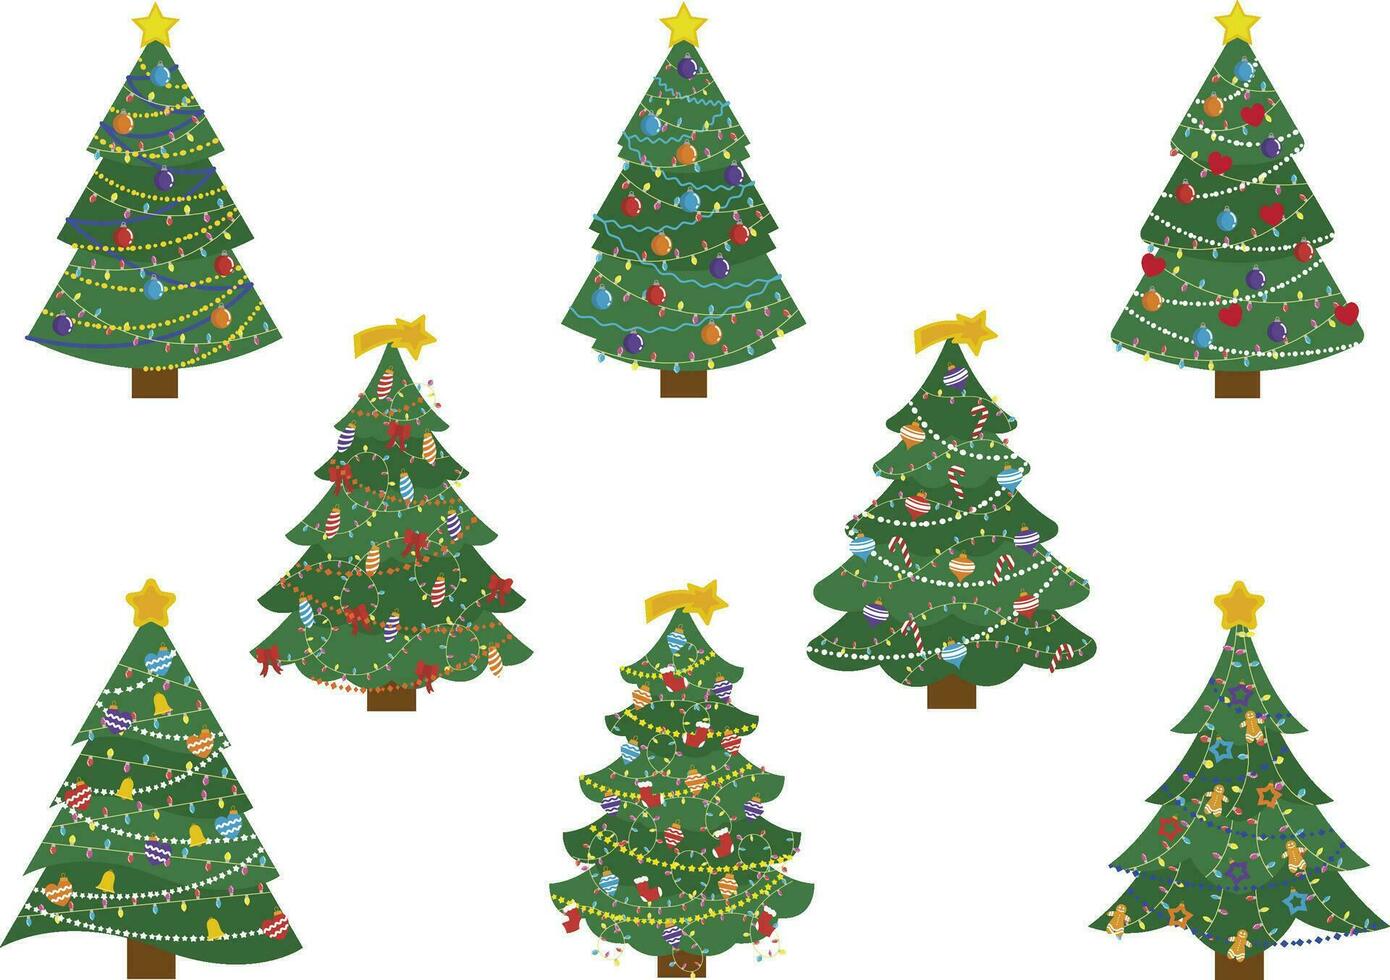 Flat green christmas trees. December holidays modern tree with snow leaves,Set of 6 pieces of Christmas decorated Christmas trees,Christmas tree collection vector